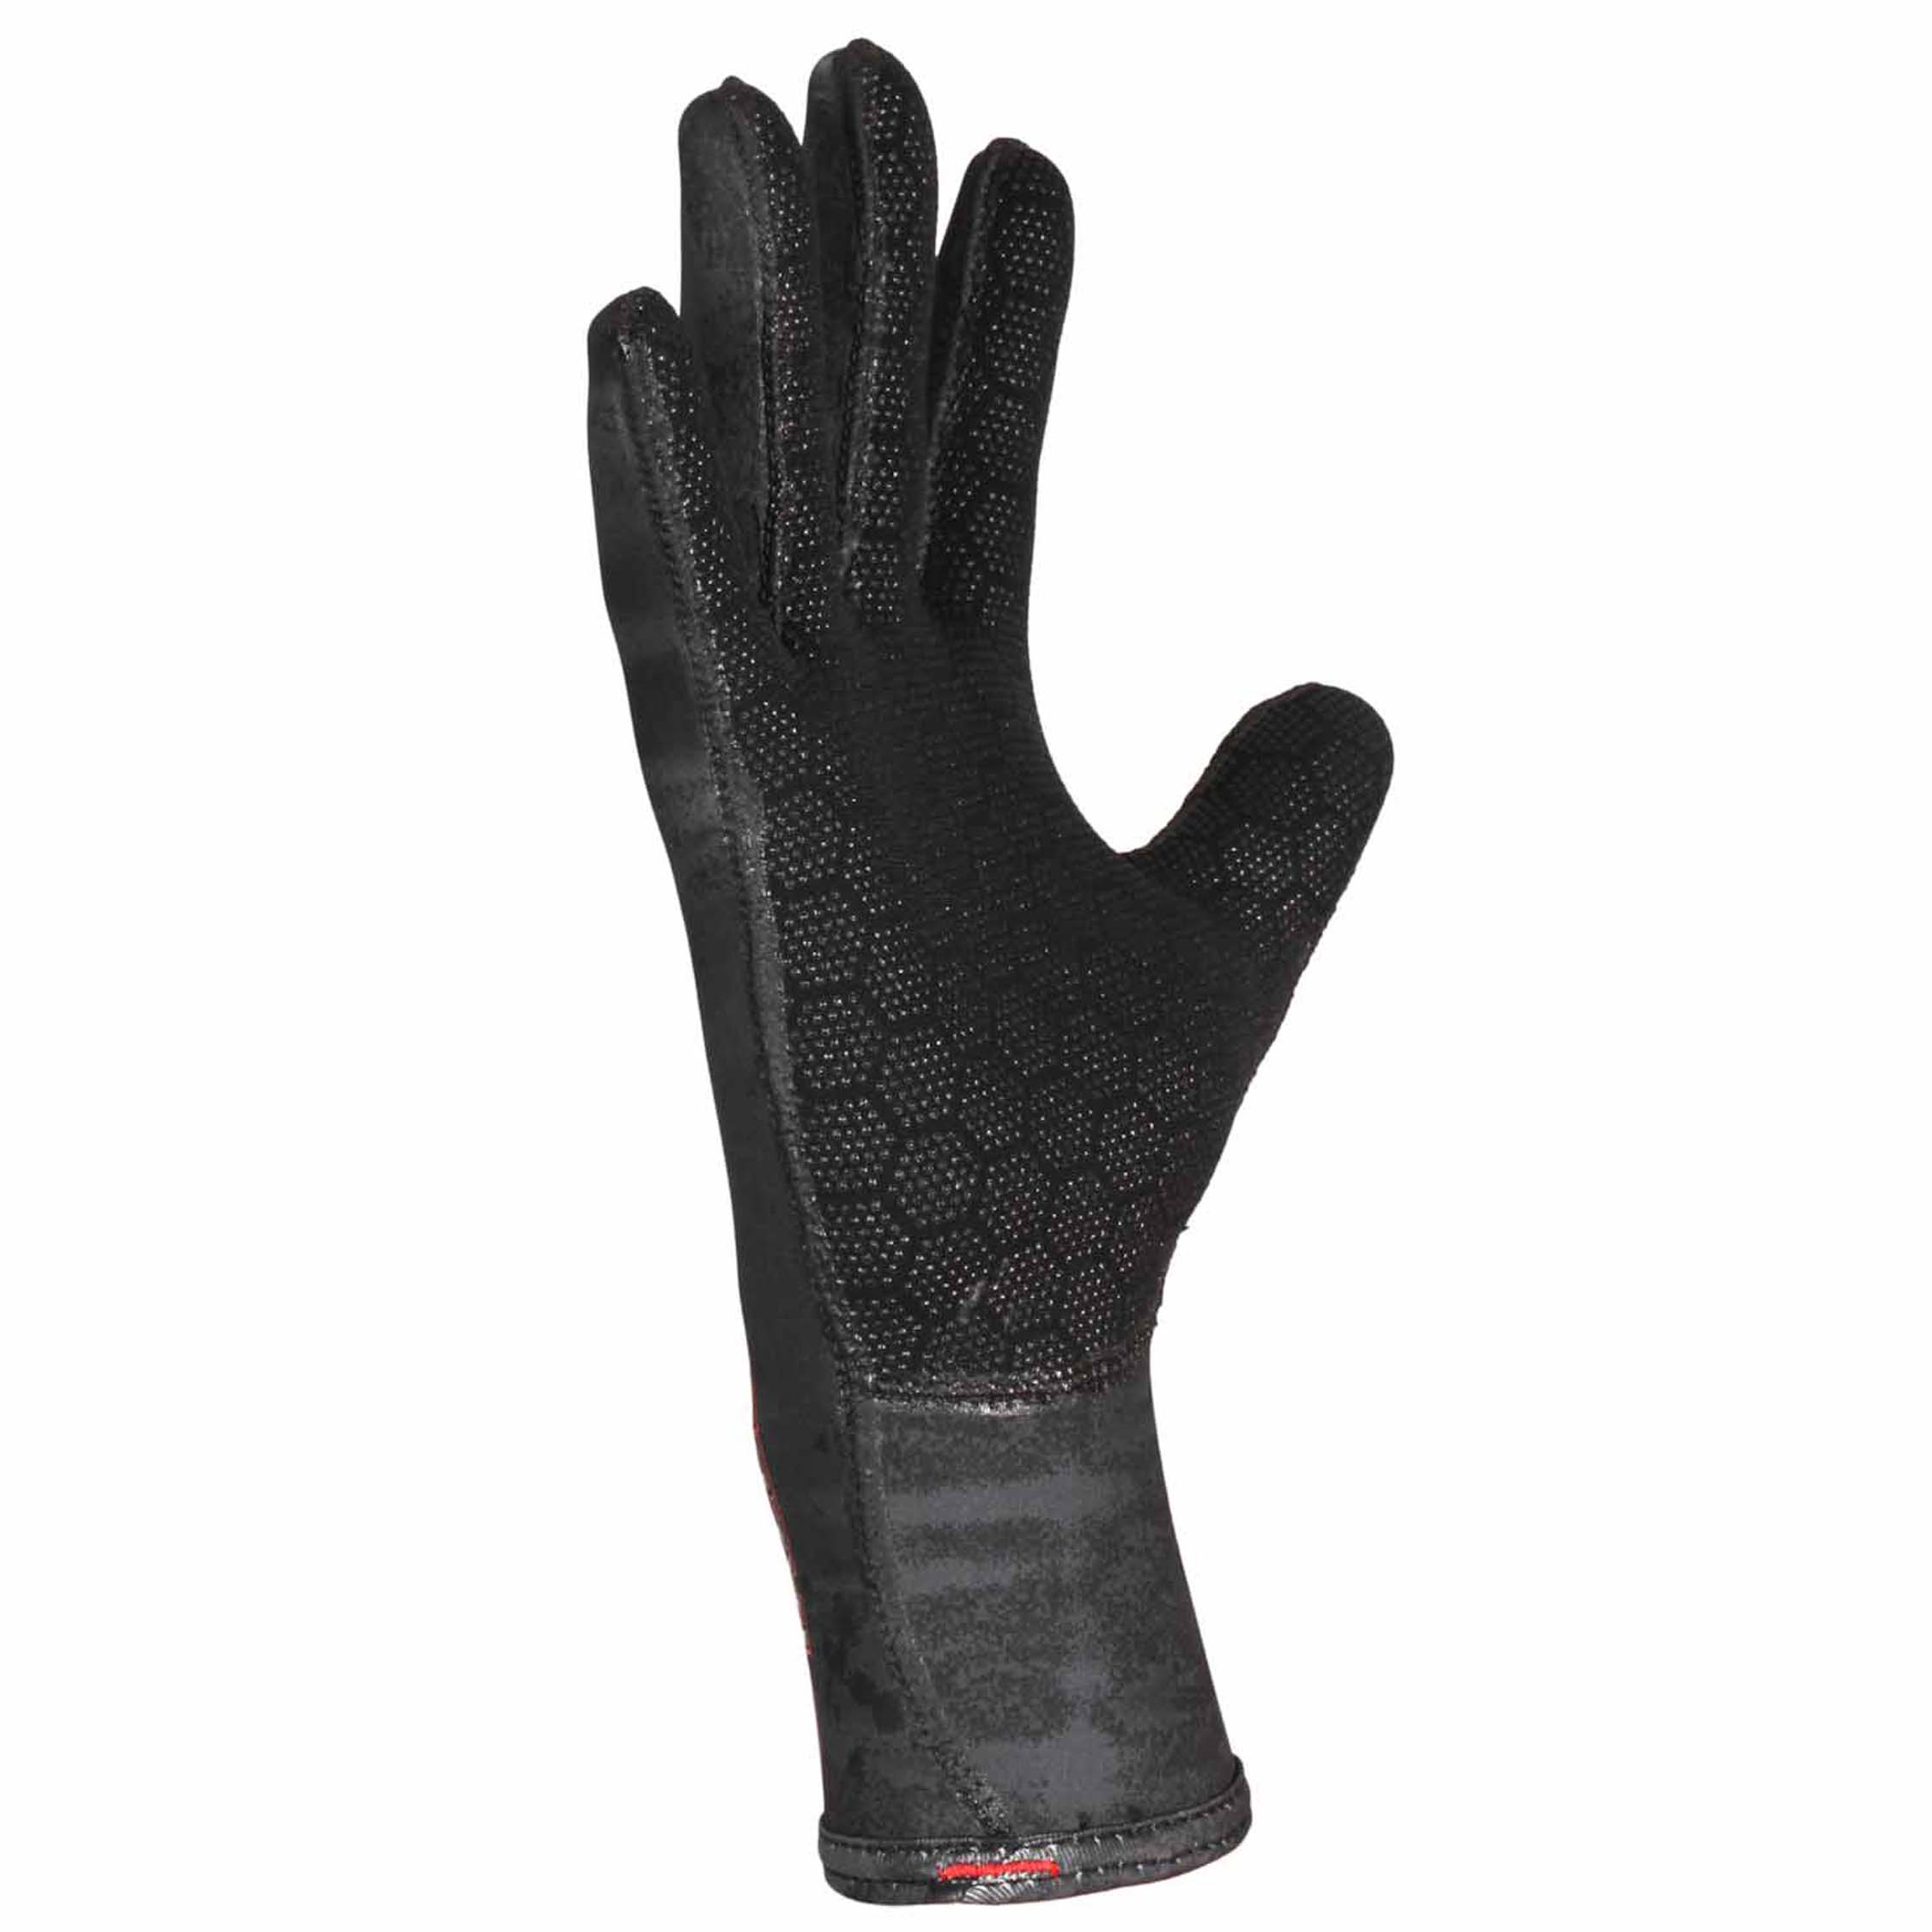 Our Featured Products Phantom Contact Grip Glove, gripper gloves